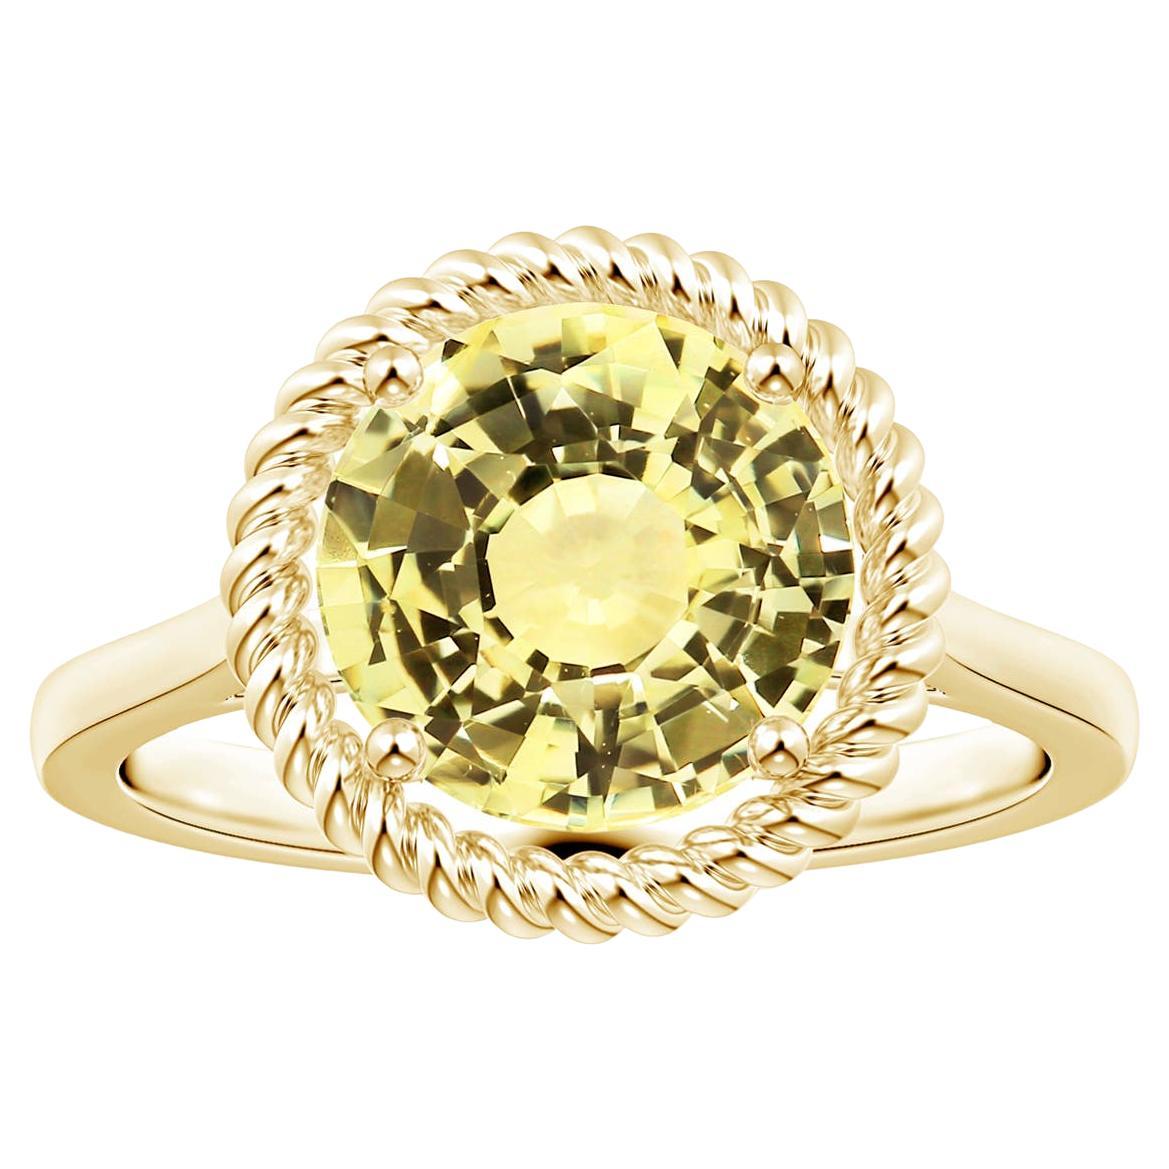 For Sale:  Angara Gia Certified Natural Yellow Sapphire Halo Ring in Yellow Gold